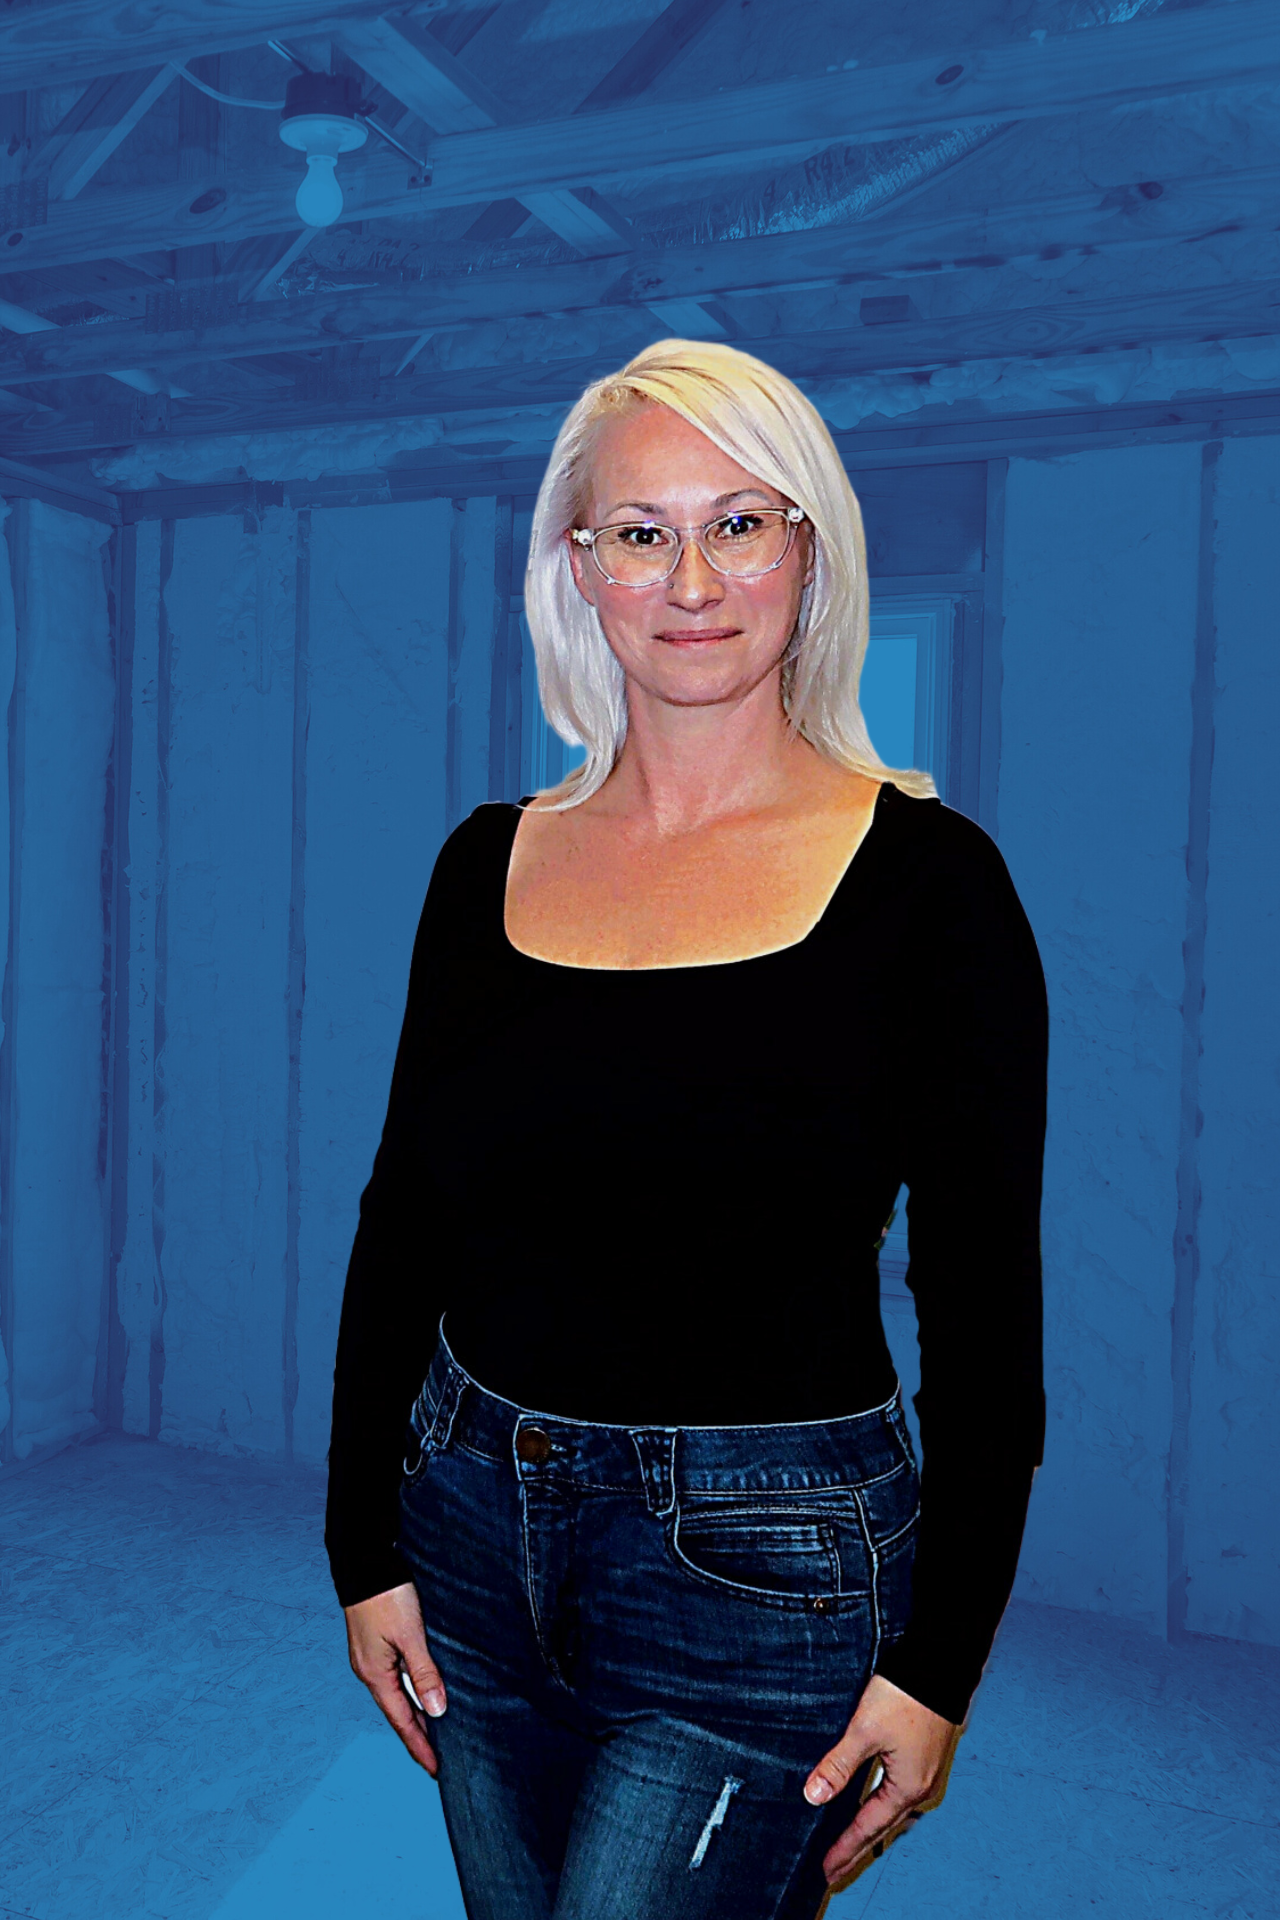 A woman wearing glasses and a black shirt is standing in front of a blue wall.